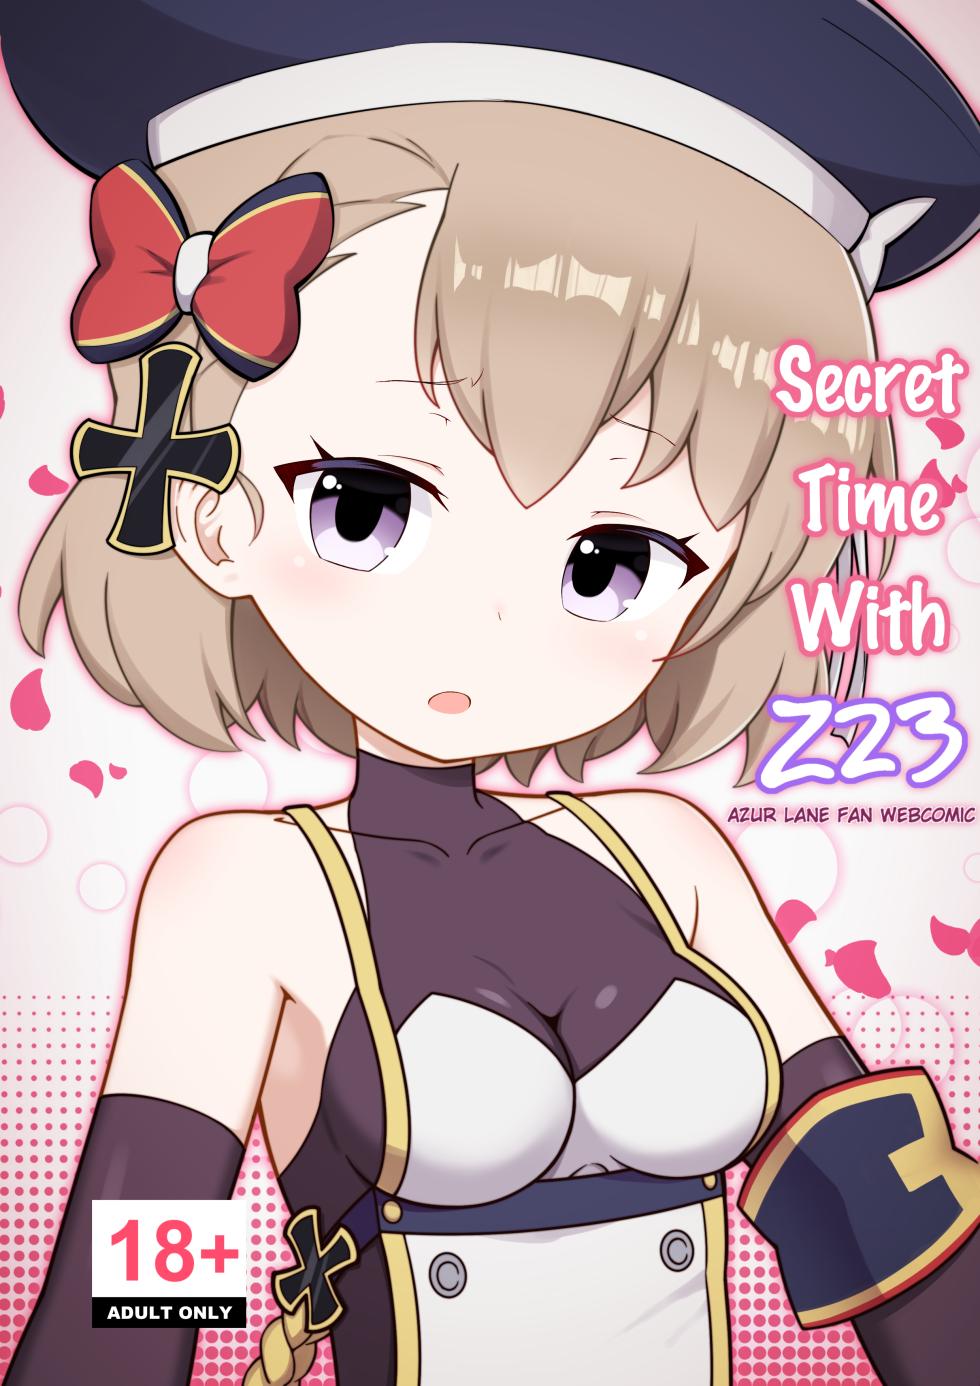 [losingmysauce] Secret Time With Z23 (Azur Lane) [English] [Censored] - Page 1